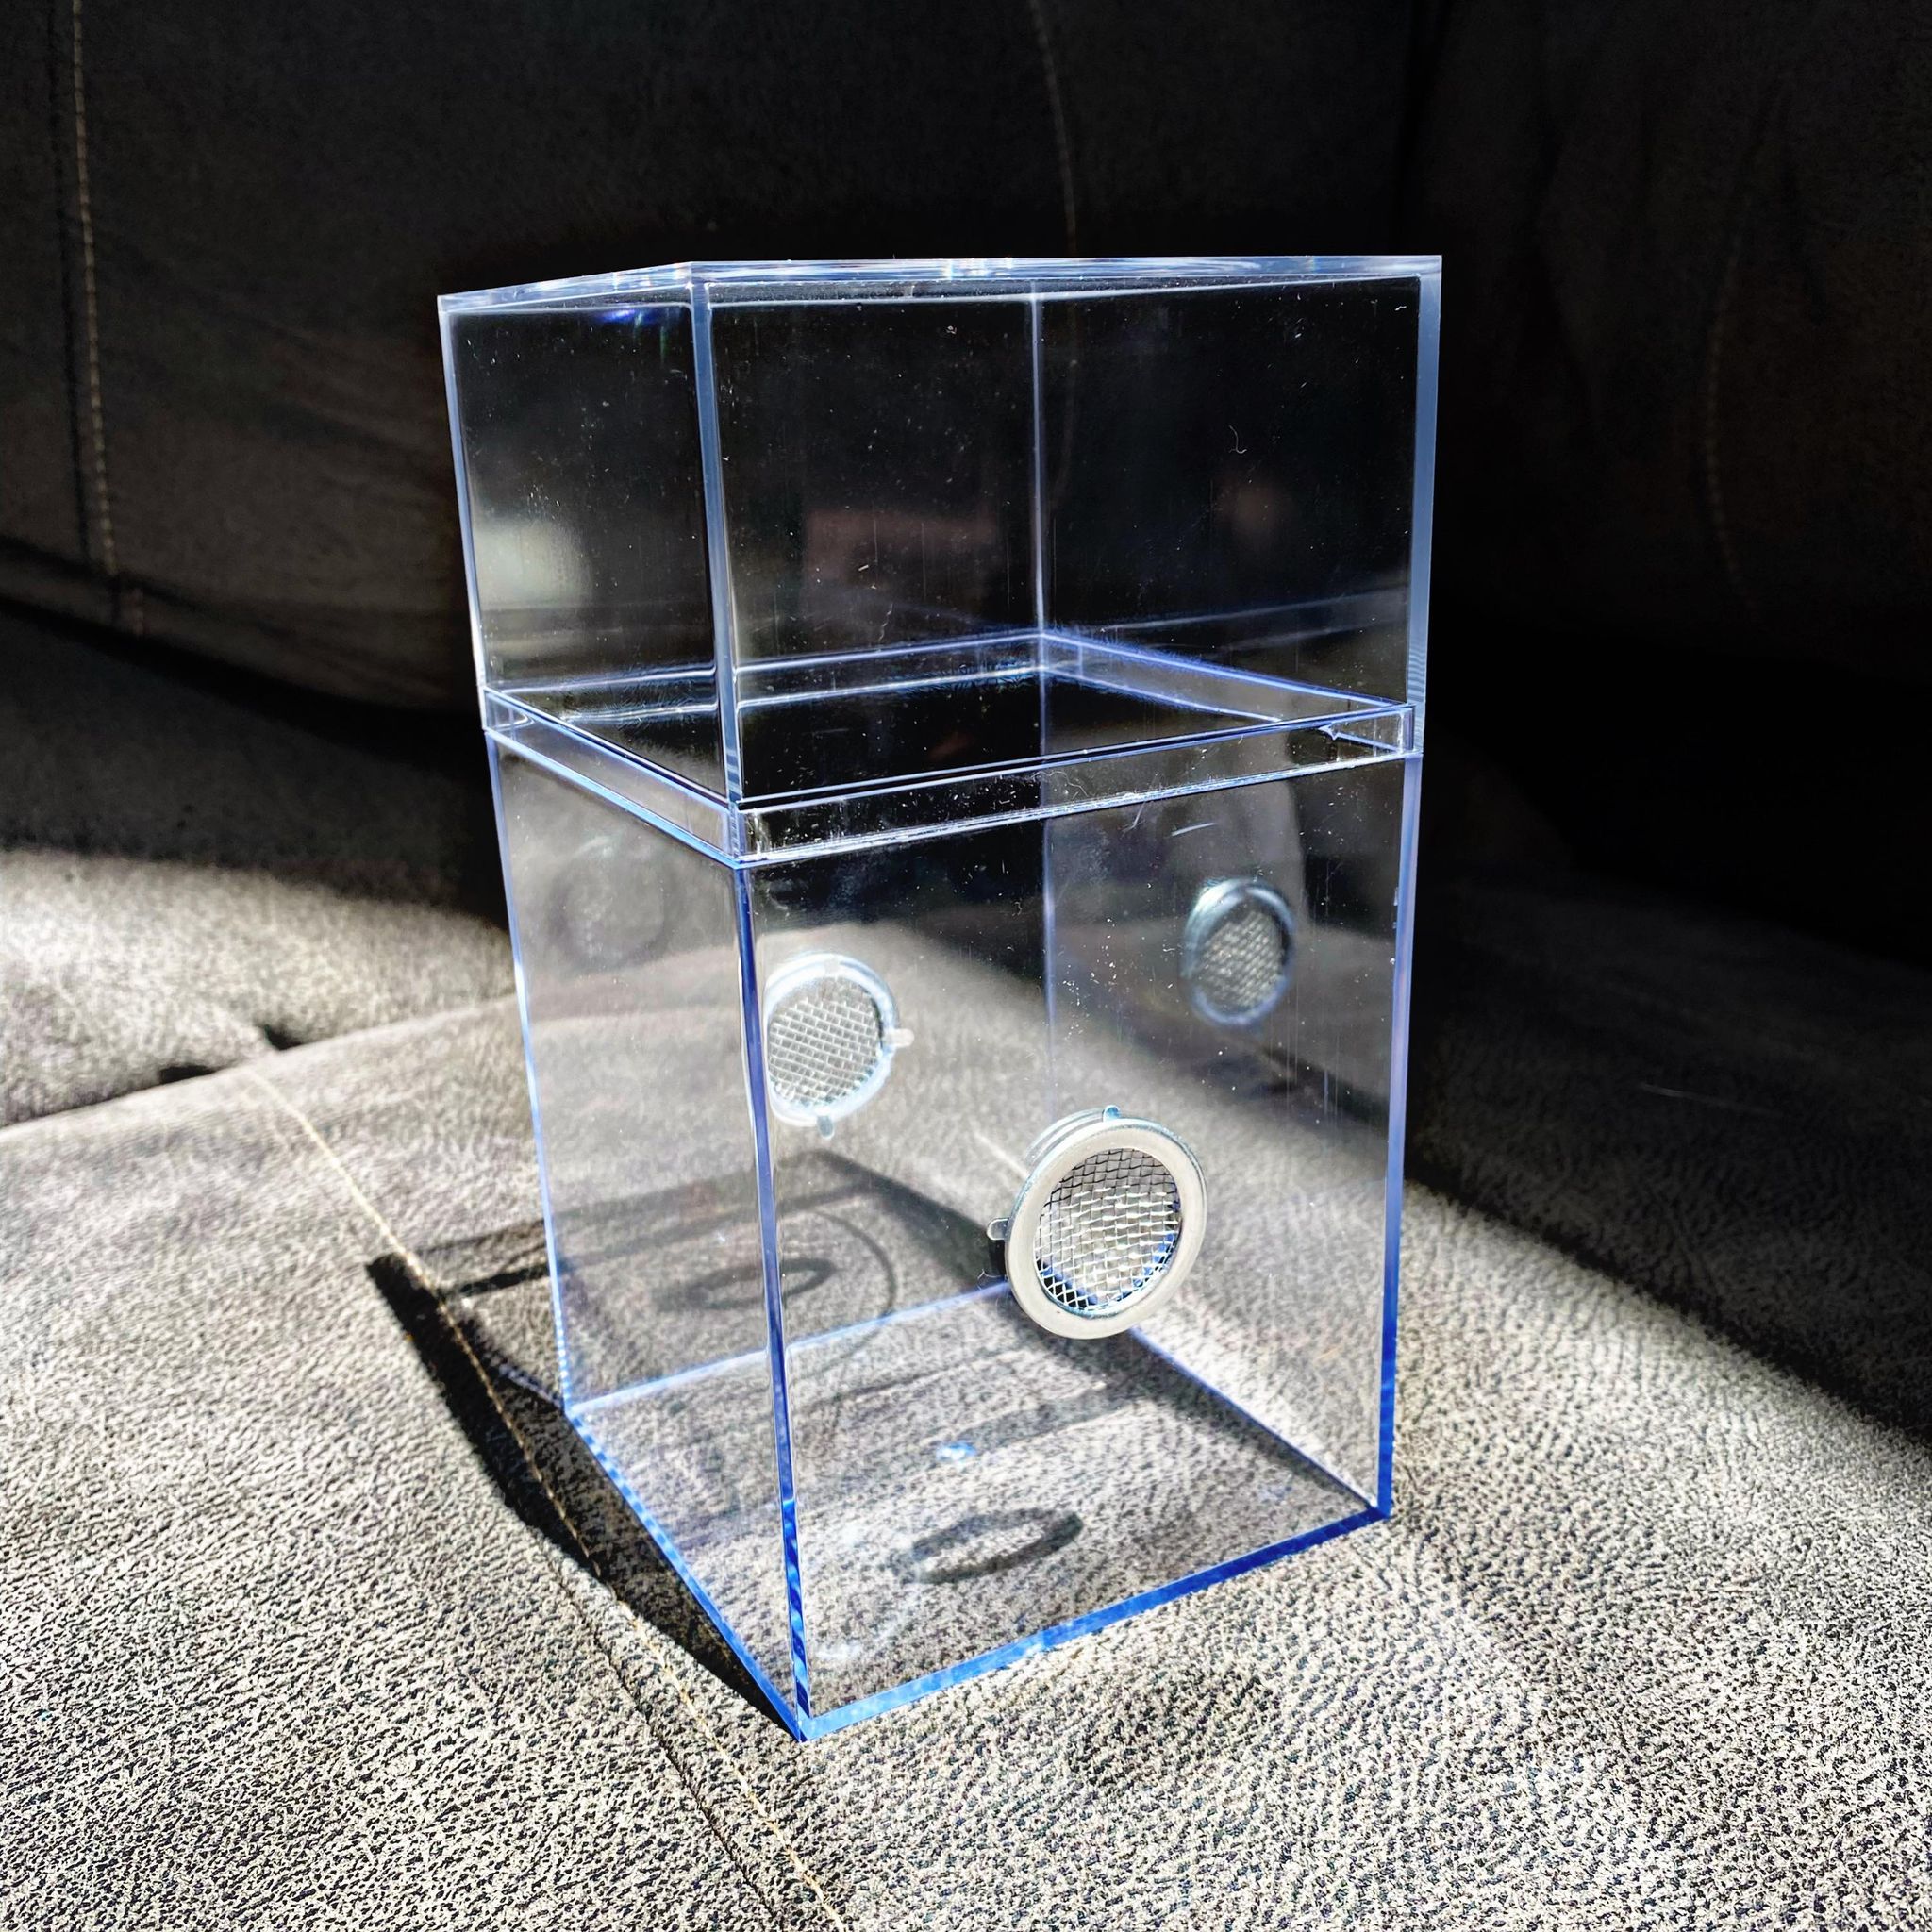 Acrylic Spider Enclosure 4x4x7.5 - Jumping Spiders For Sale - Spiders Source - #1 Regal Jumping Spider Store